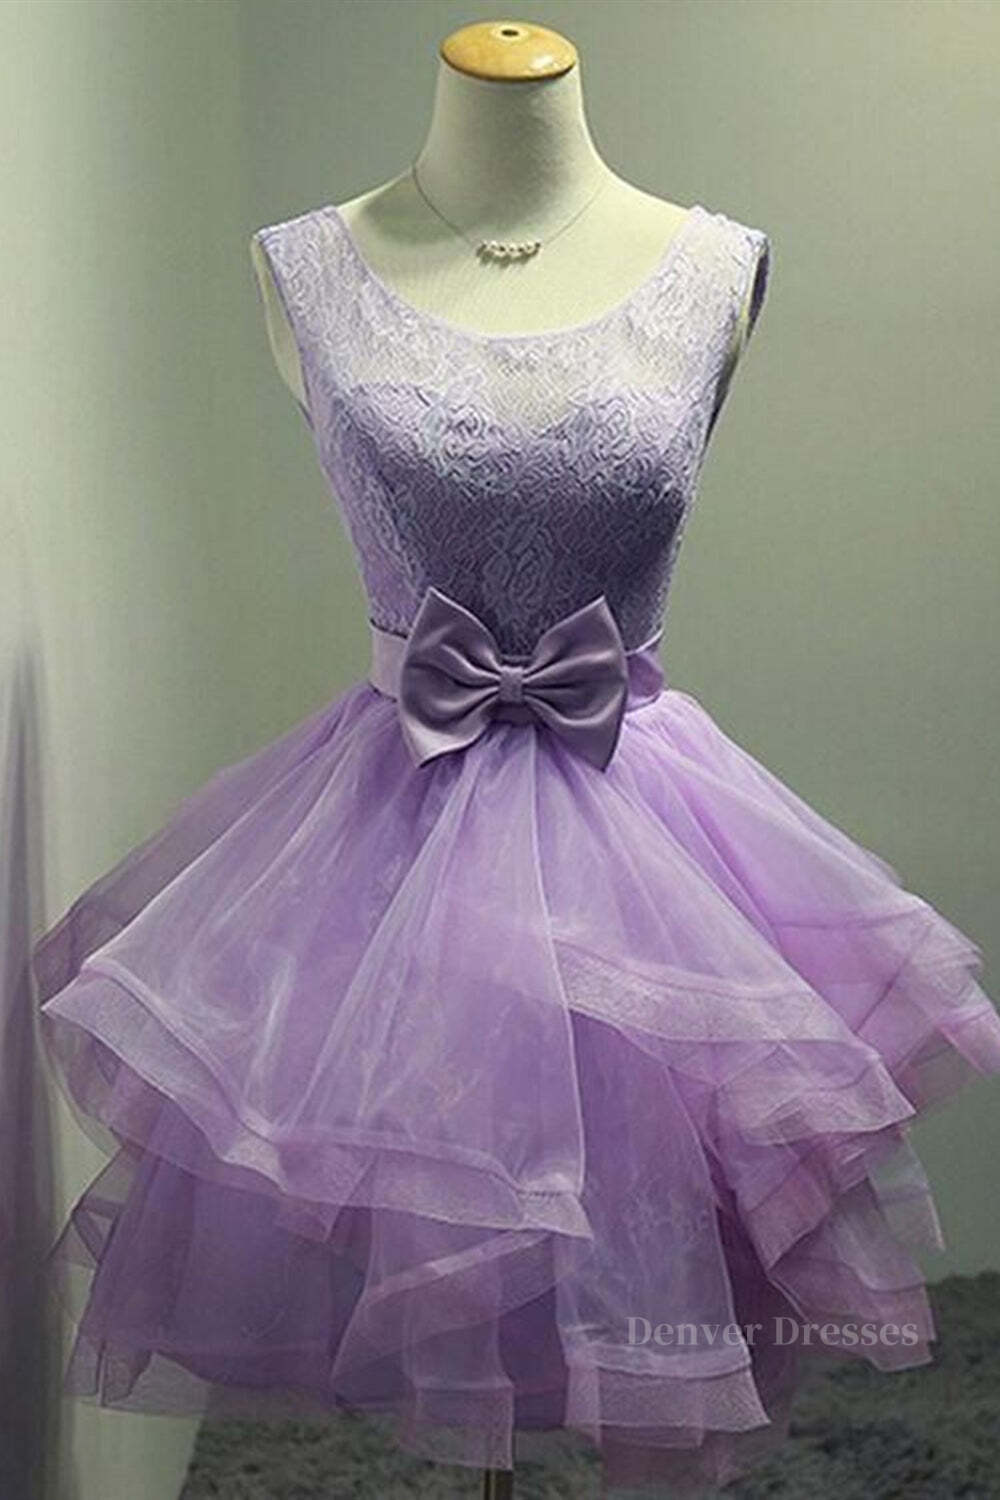 Prom Dresses Ball Gown Style, Round Neck Purple Lace Short Prom Dresses, Lilac Lace Homecoming Dresses, Purple Formal Evening Dresses